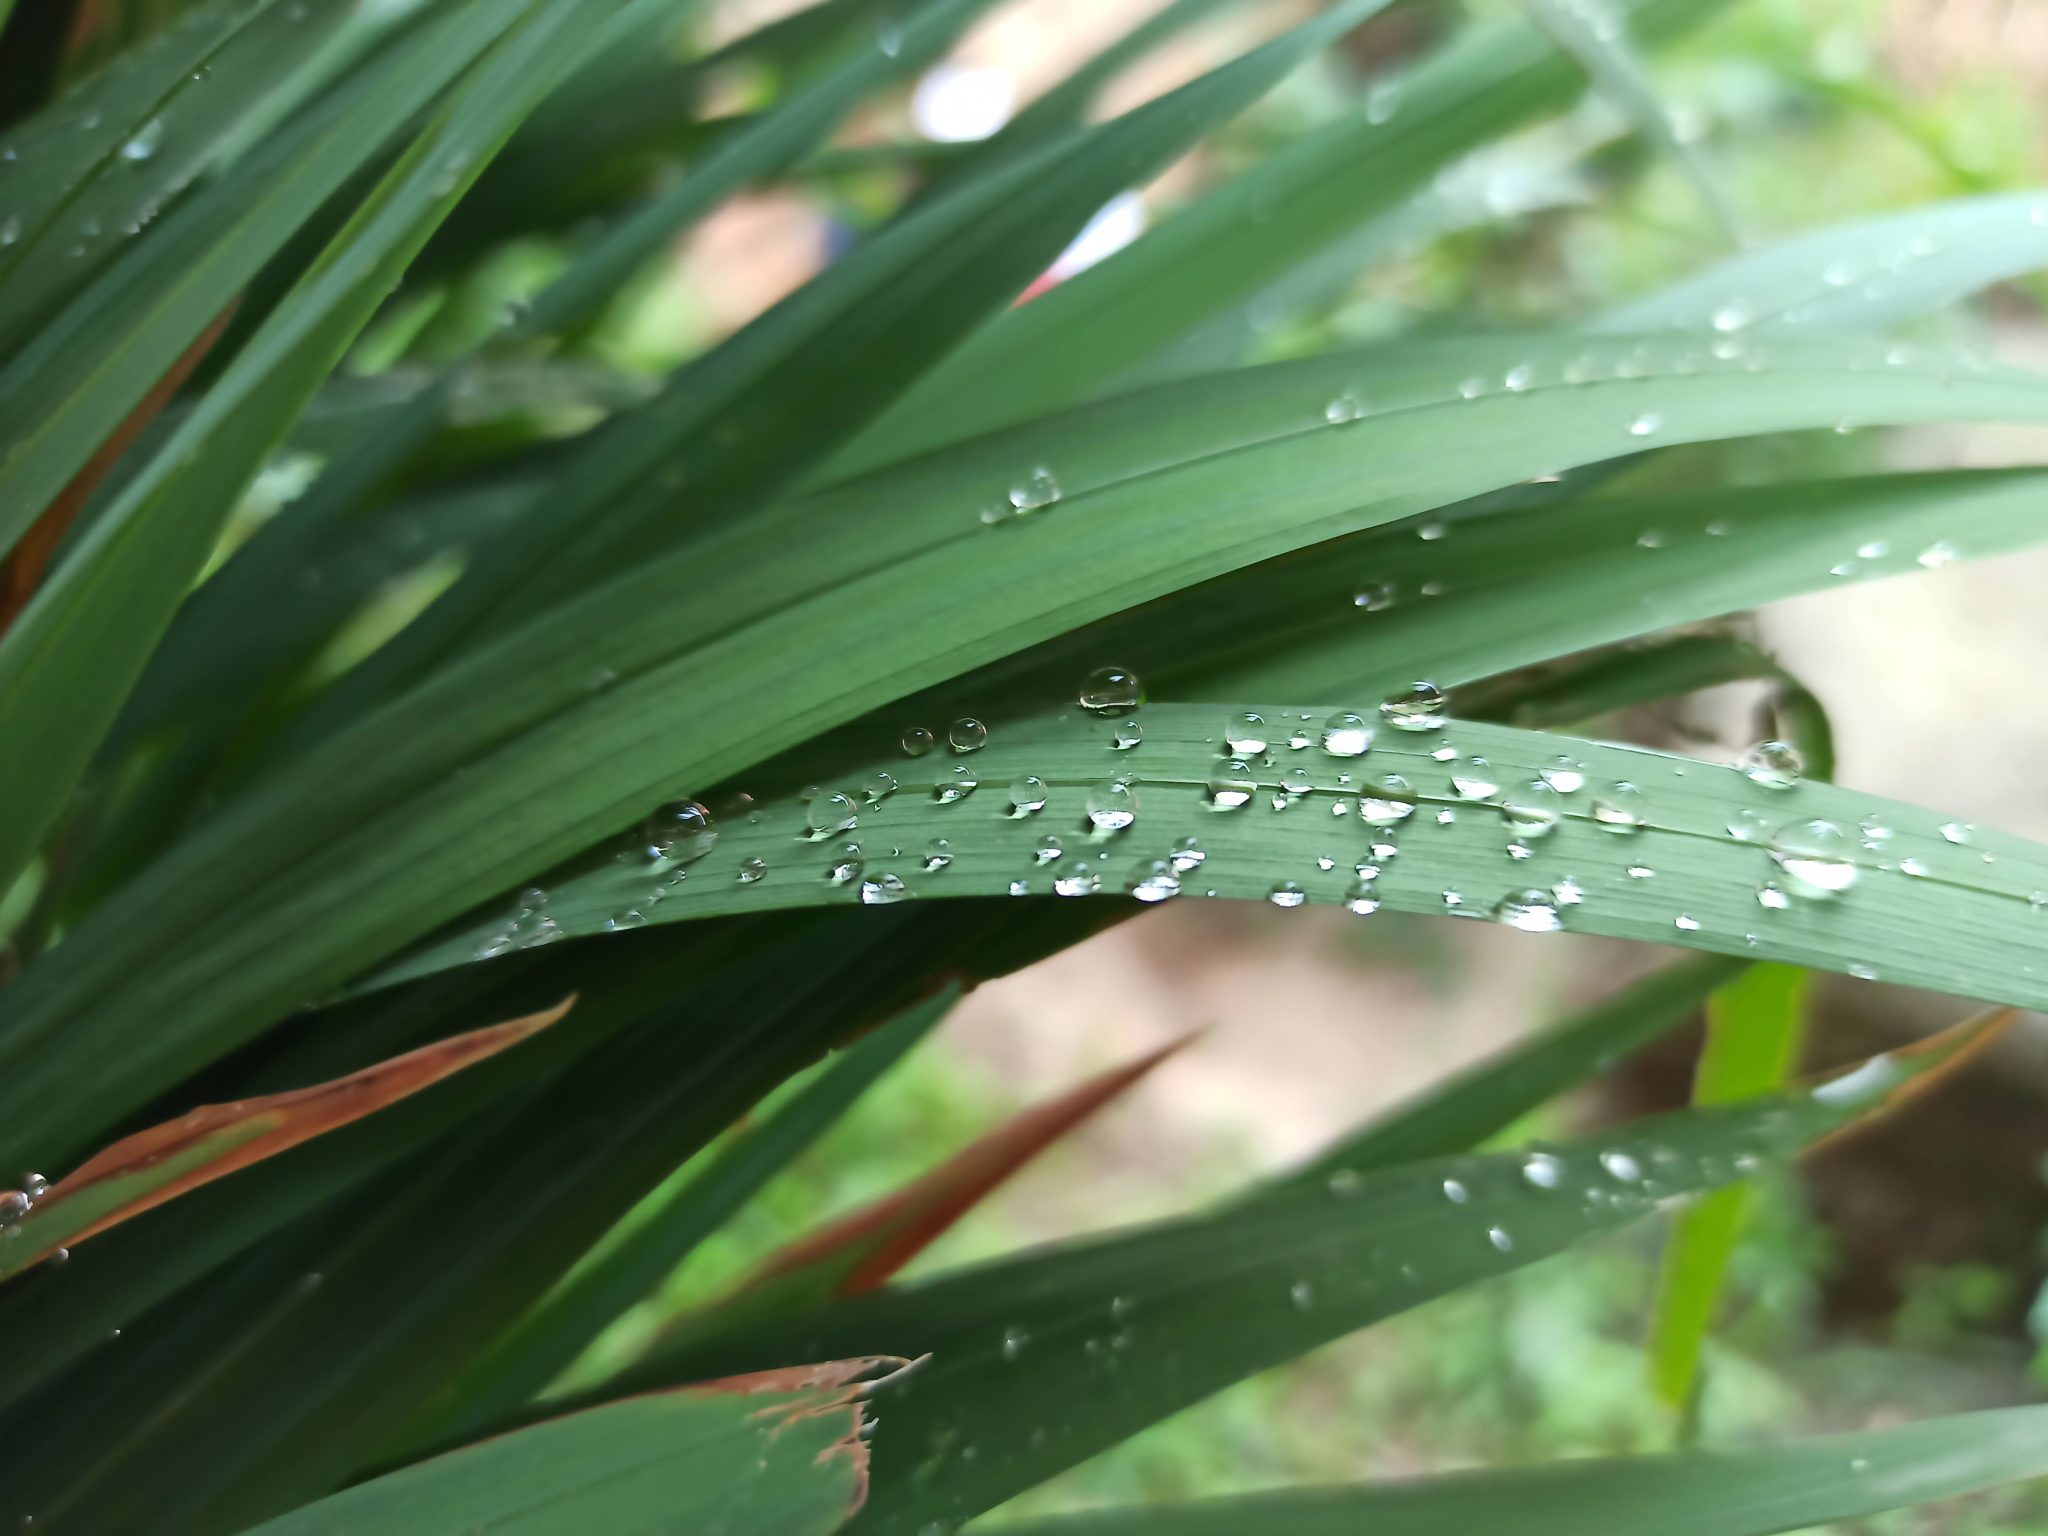 Morning welcomed with water droplets on plant.